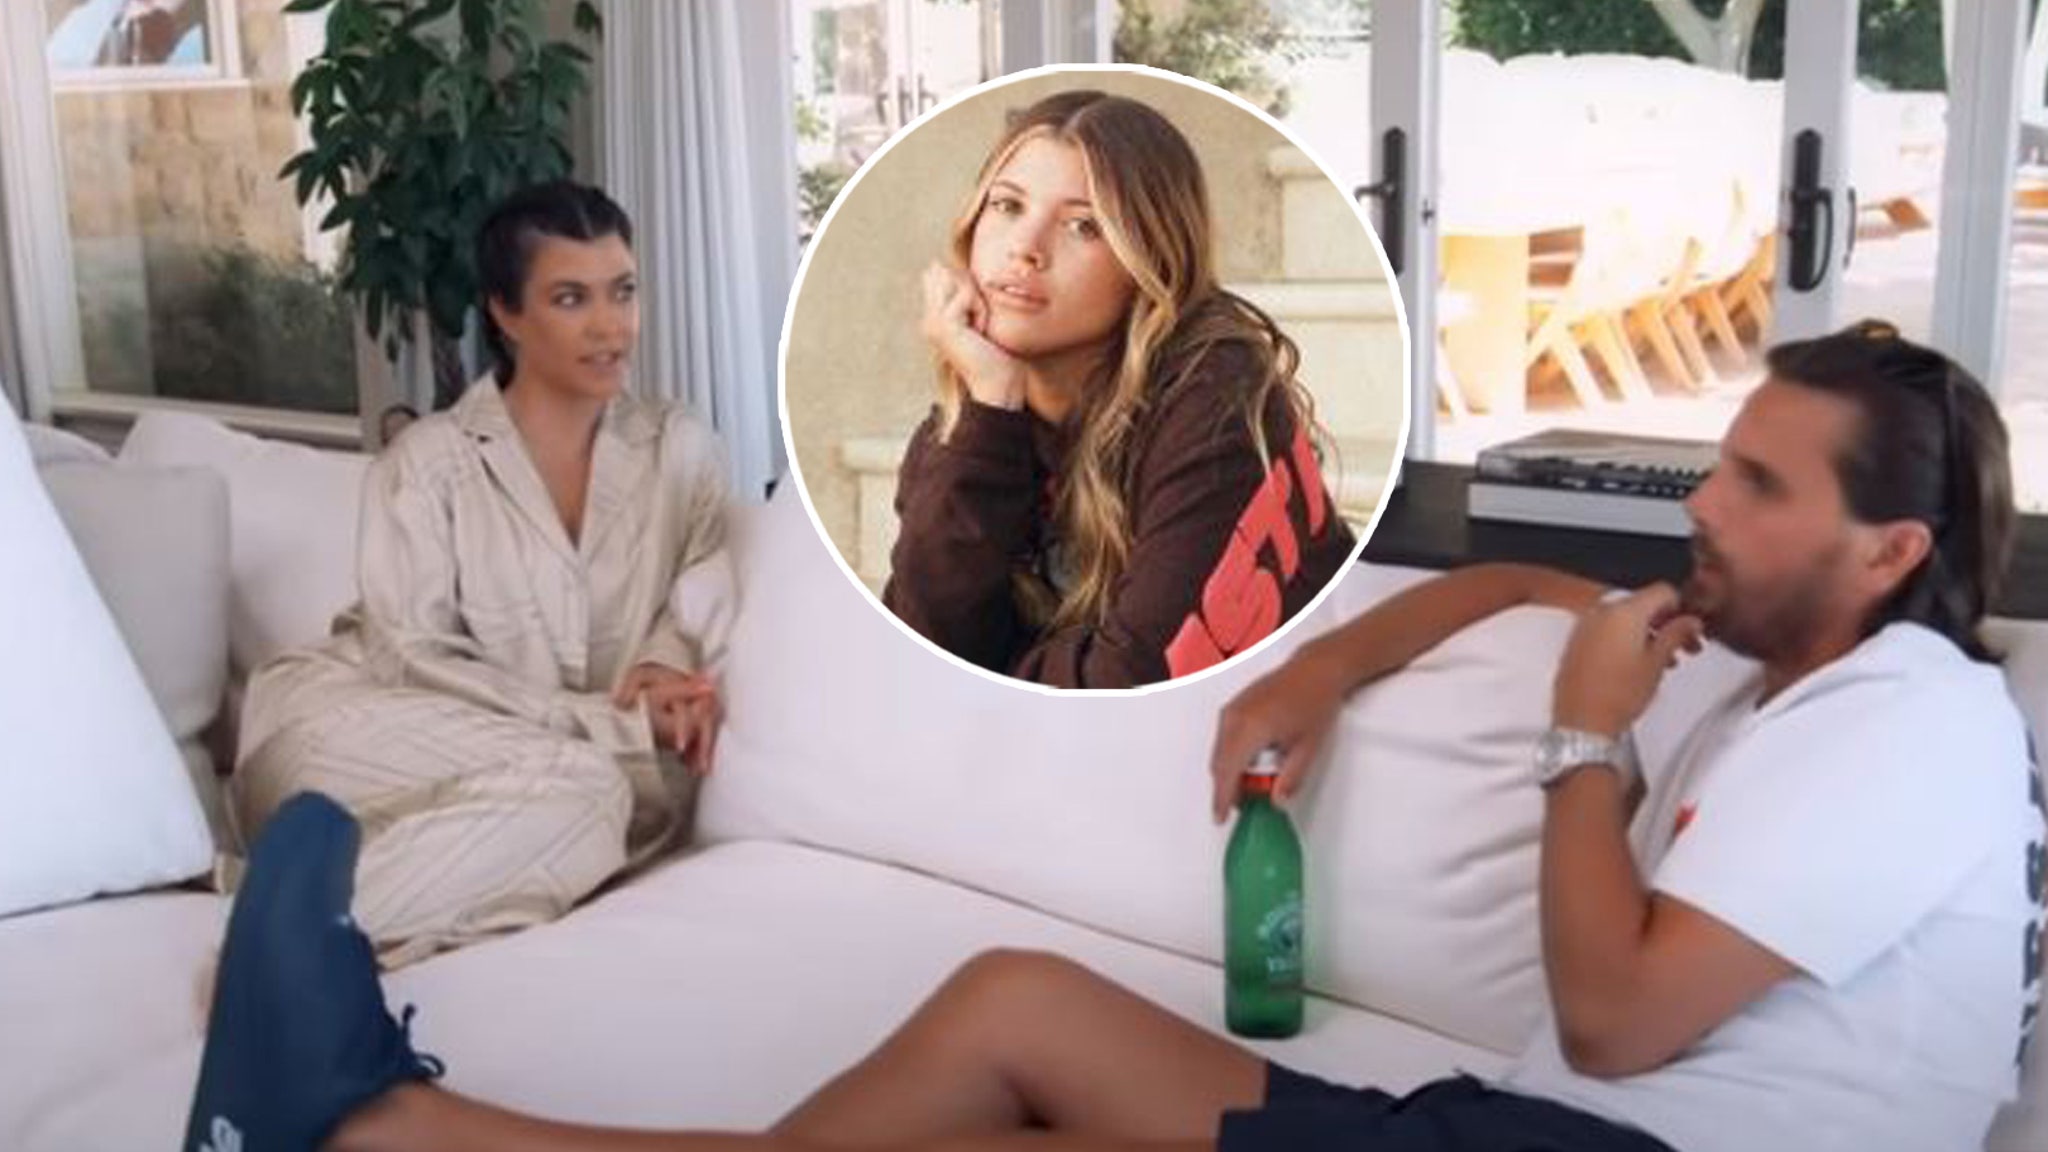 Kourtney and Scott Dish at Sofia Richie, Discuss Aging ‘Together’